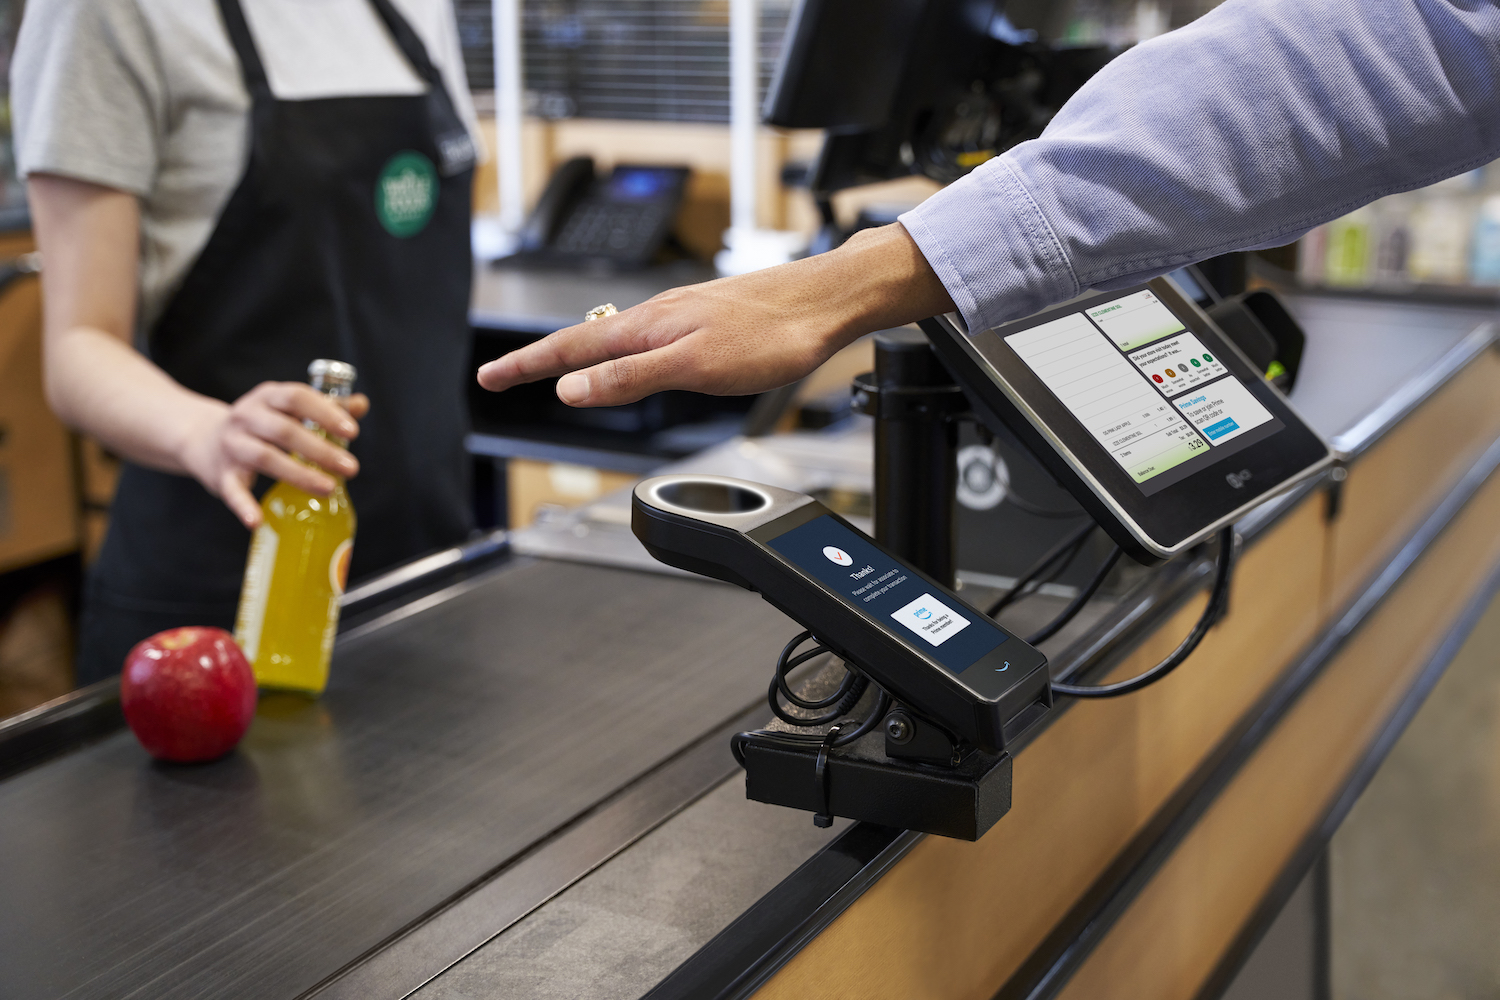 A Whole Foods customer uses their palm to pay using Amazon One.